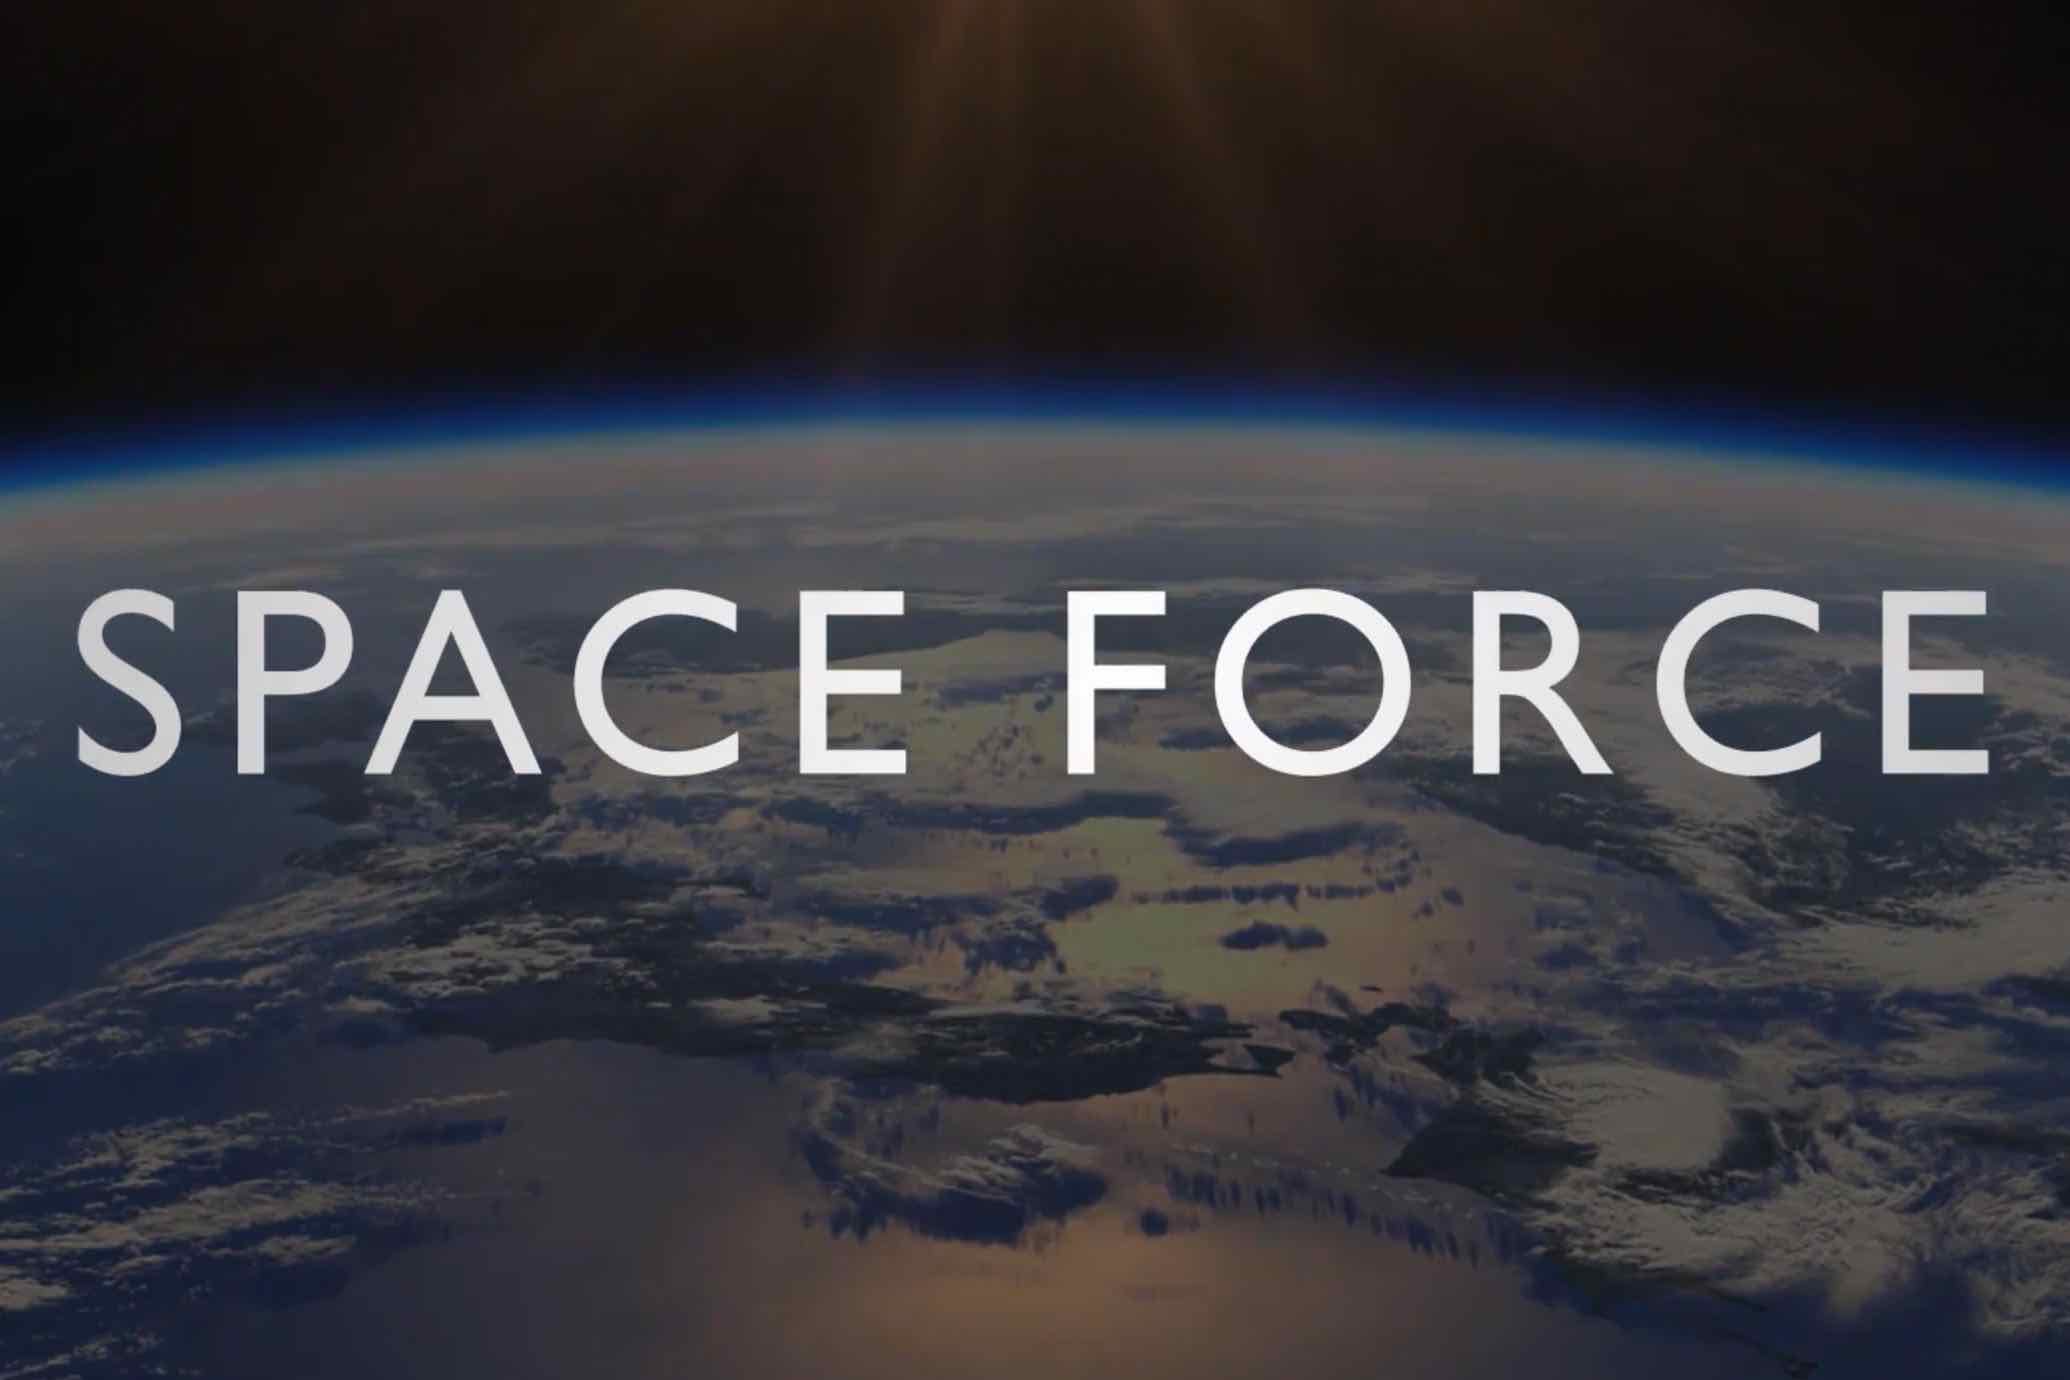 The new Netflix comedy 'Space Force' is currently in production with an all-star cast and lots of potential. Here's what we know.